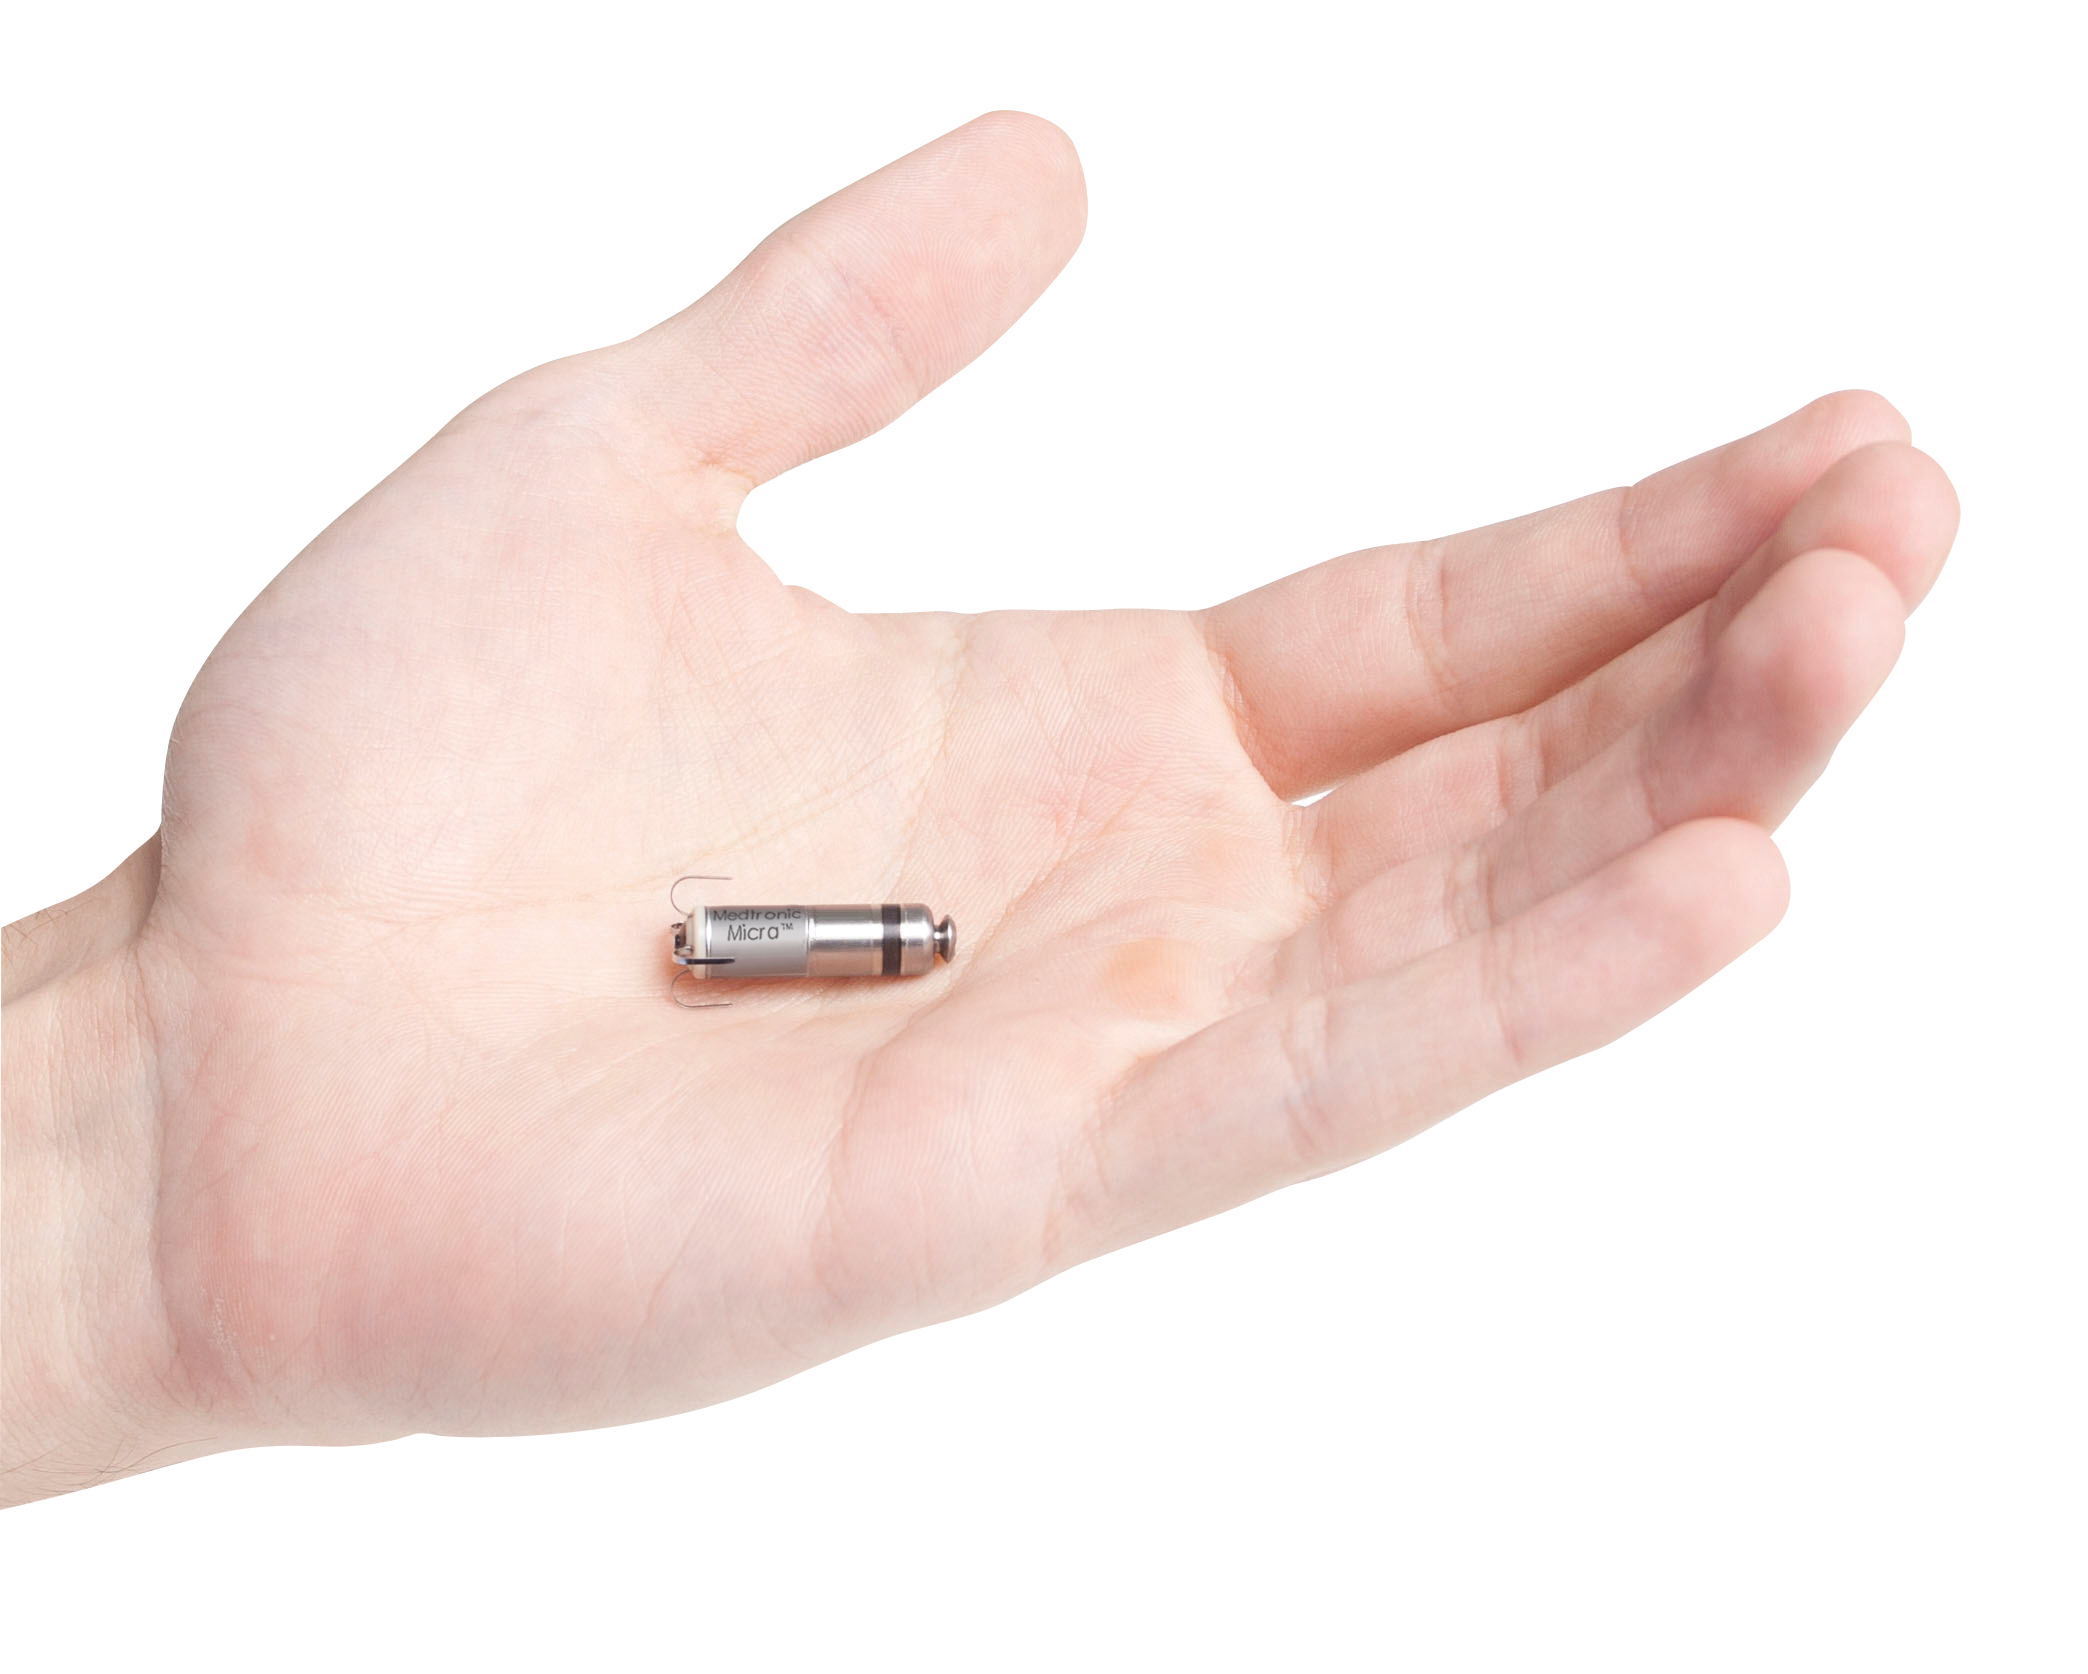 Englewood Hospital and Medical Center Implants World’s Smallest Wireless Pacemaker